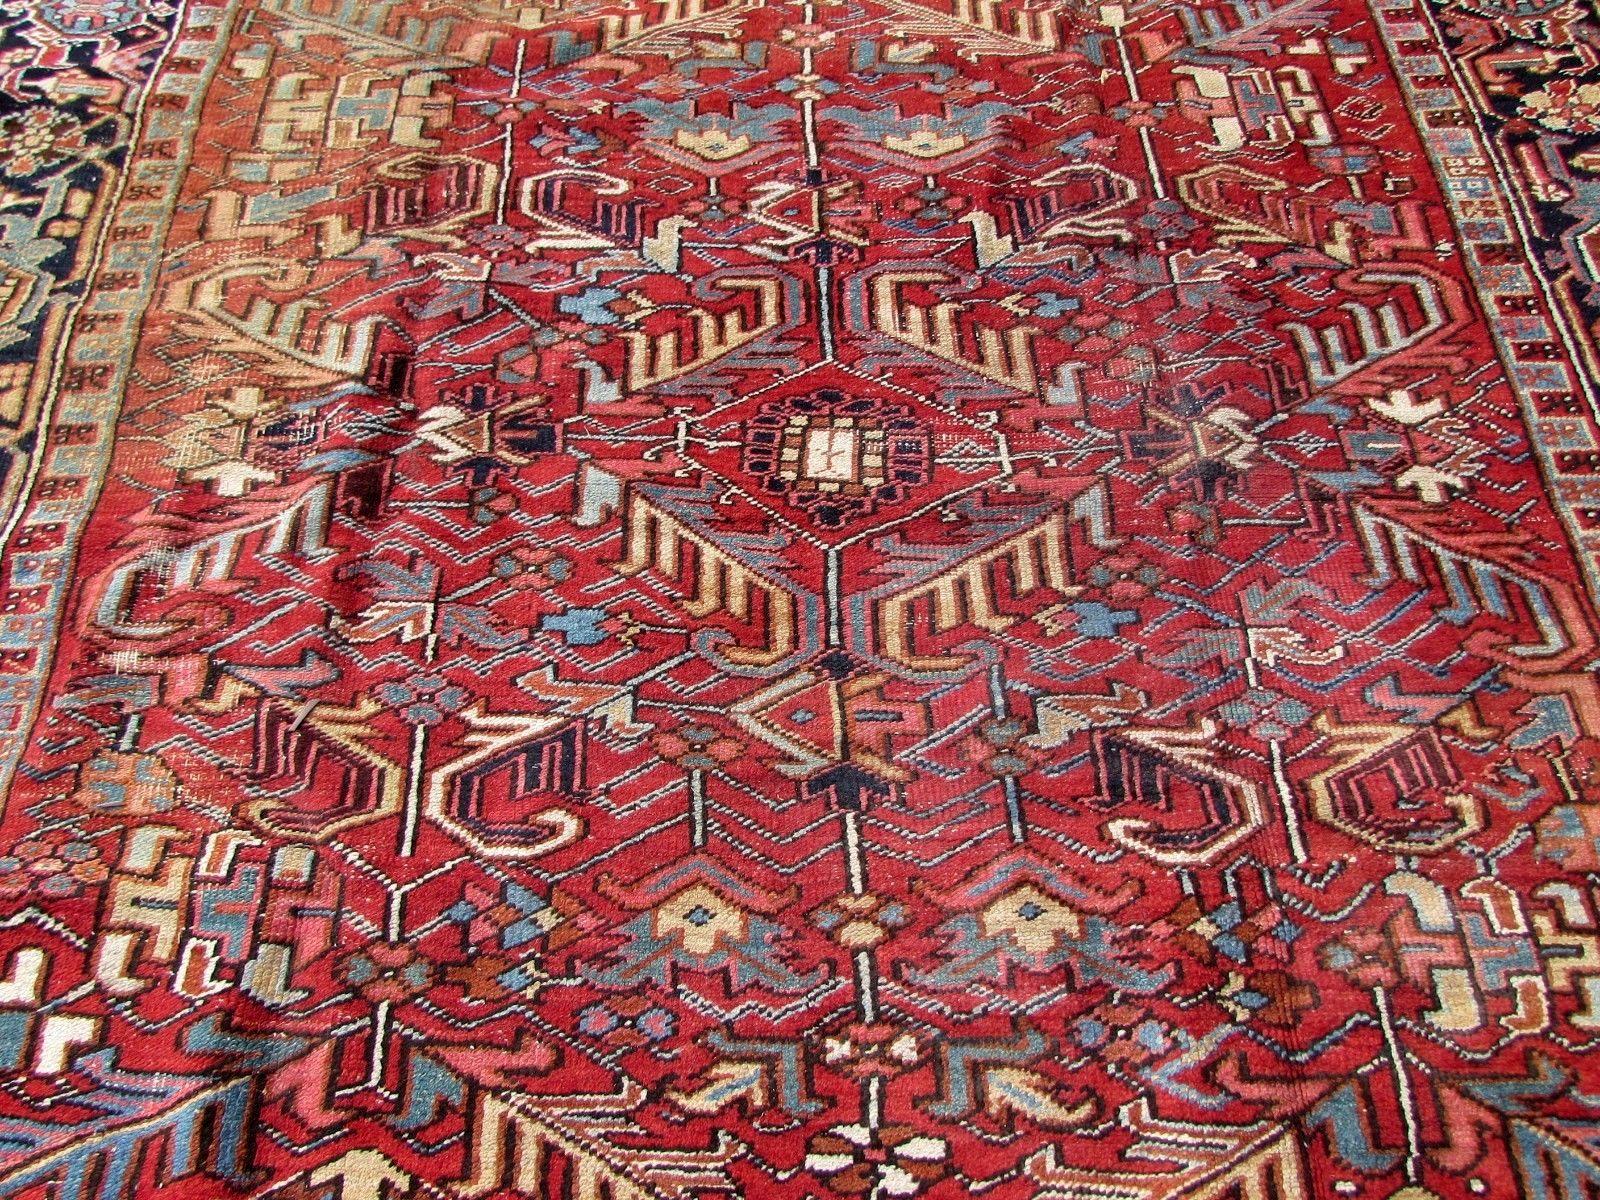 Handmade antique Persian Heriz rug in red wool. The rug is from the beginning of 20th century, it is in original condition, it has some age wear, low pile and yellow stain on one side.

-Condition: Distressed, yellow stain on one side,

-circa